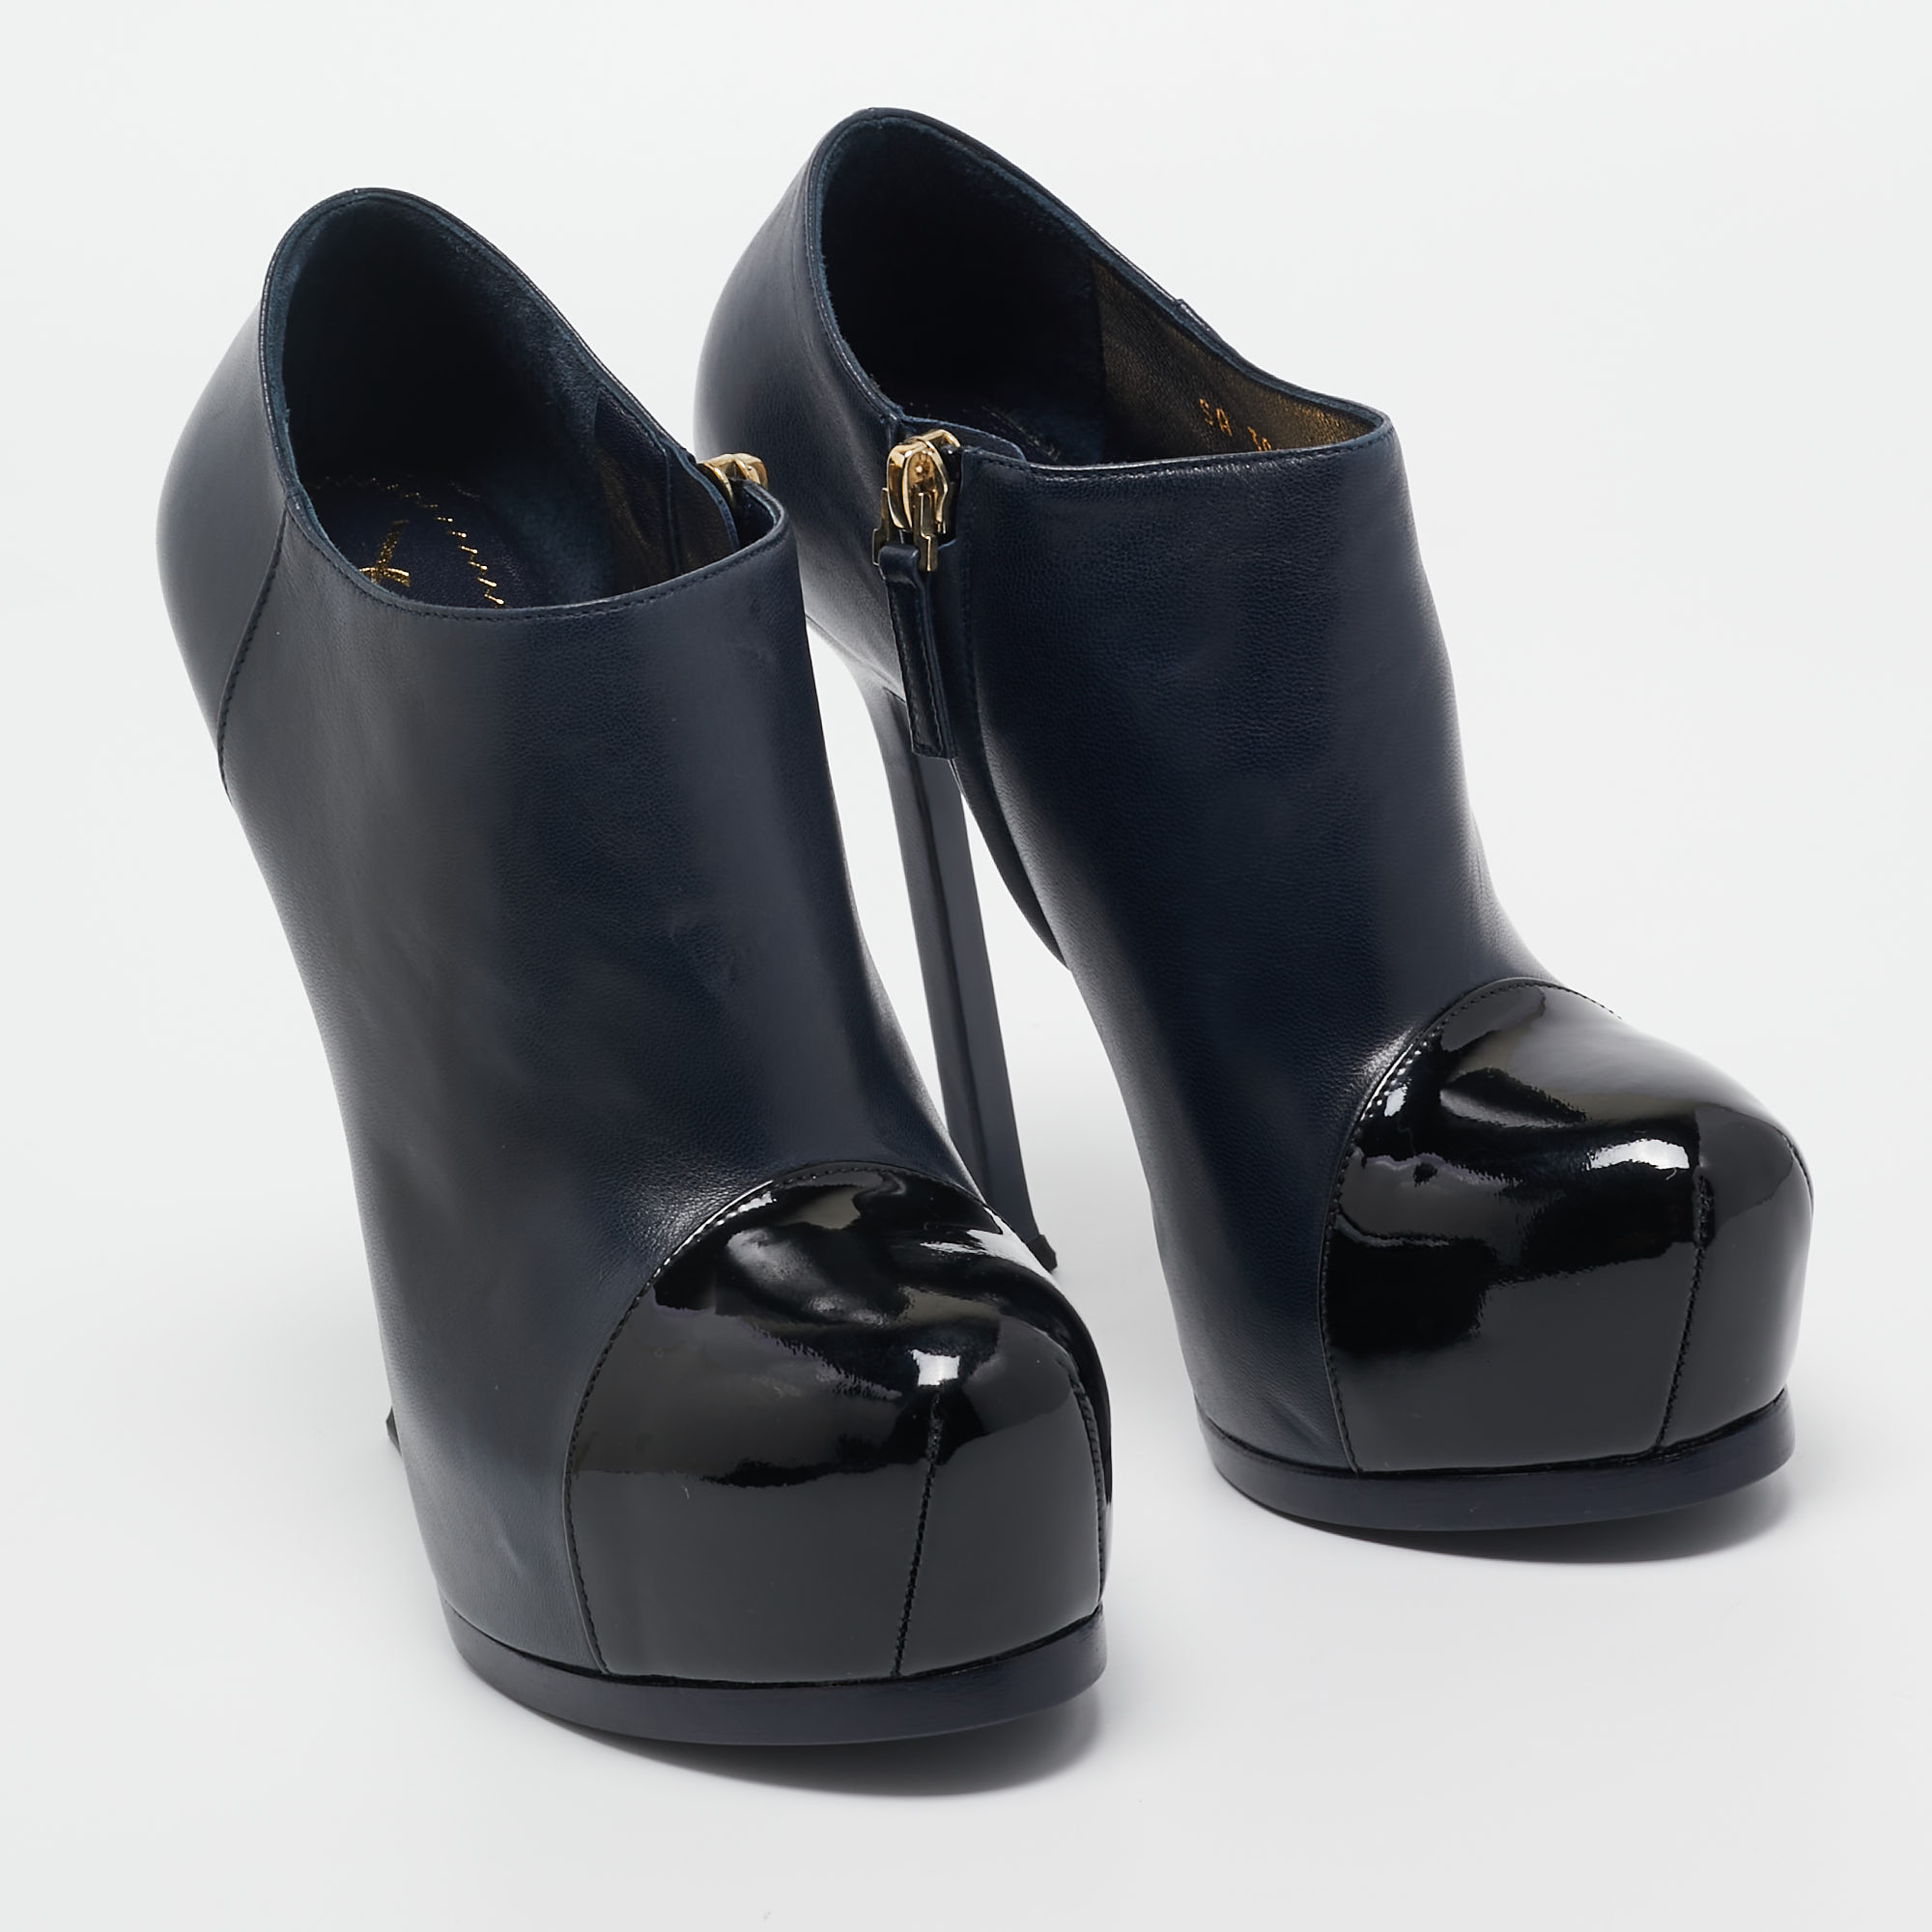 Yves Saint Laurent Navy Blue/Black Leather And Patent Leather Tribute Platform Ankle Boots Size 36